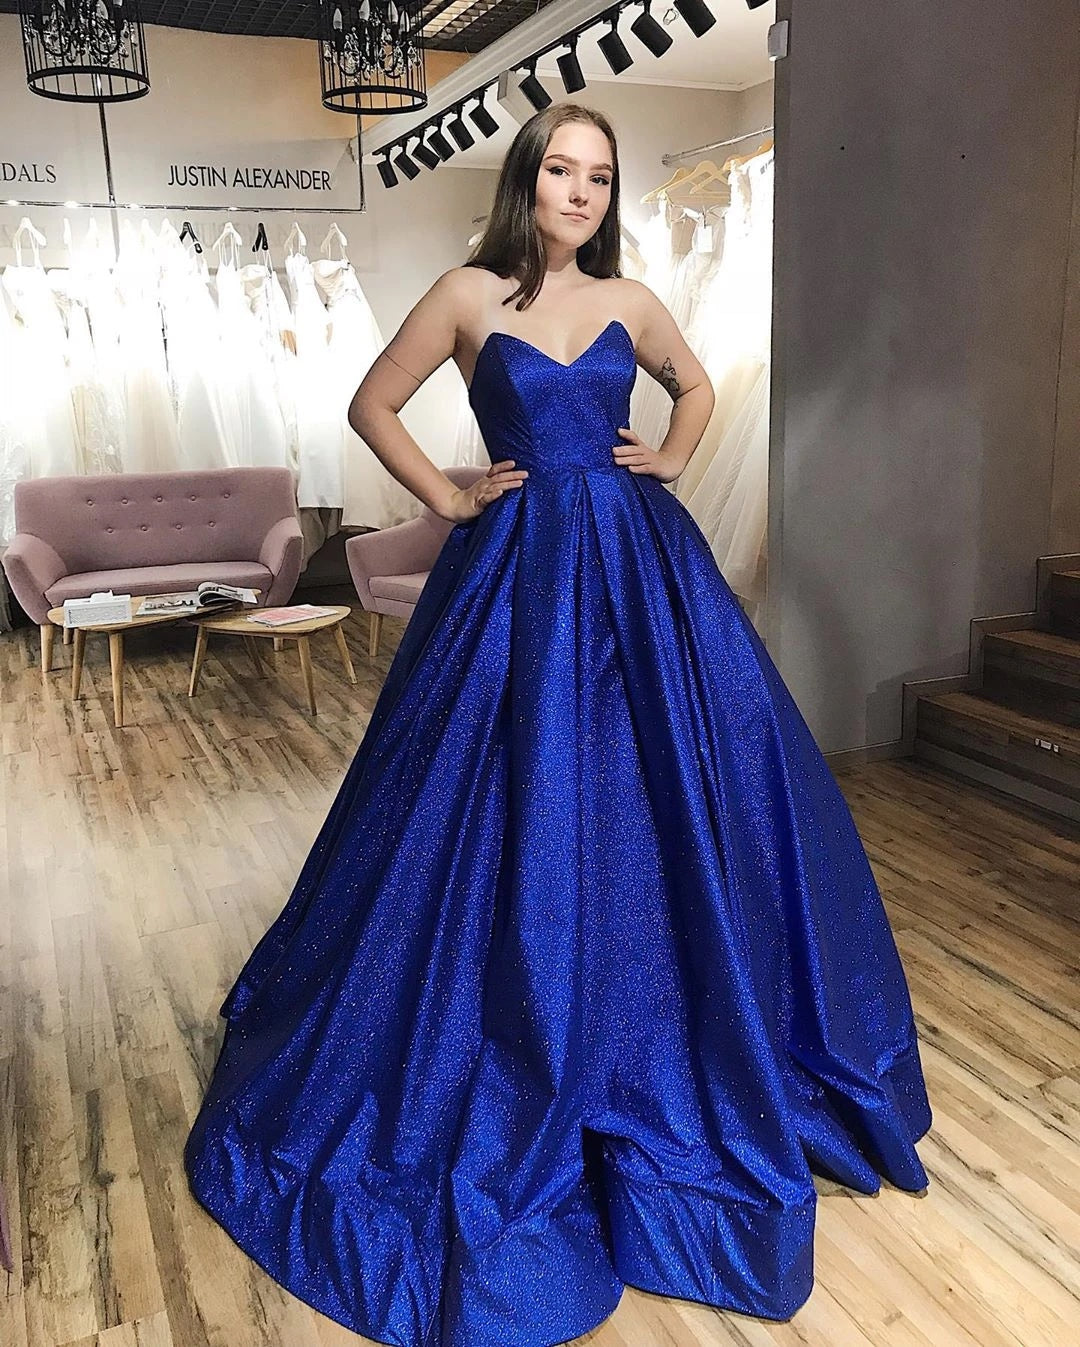 Sweetheart Sparkly Newest Prom Dresses, Strapless 2020 A-line Prom Dresses